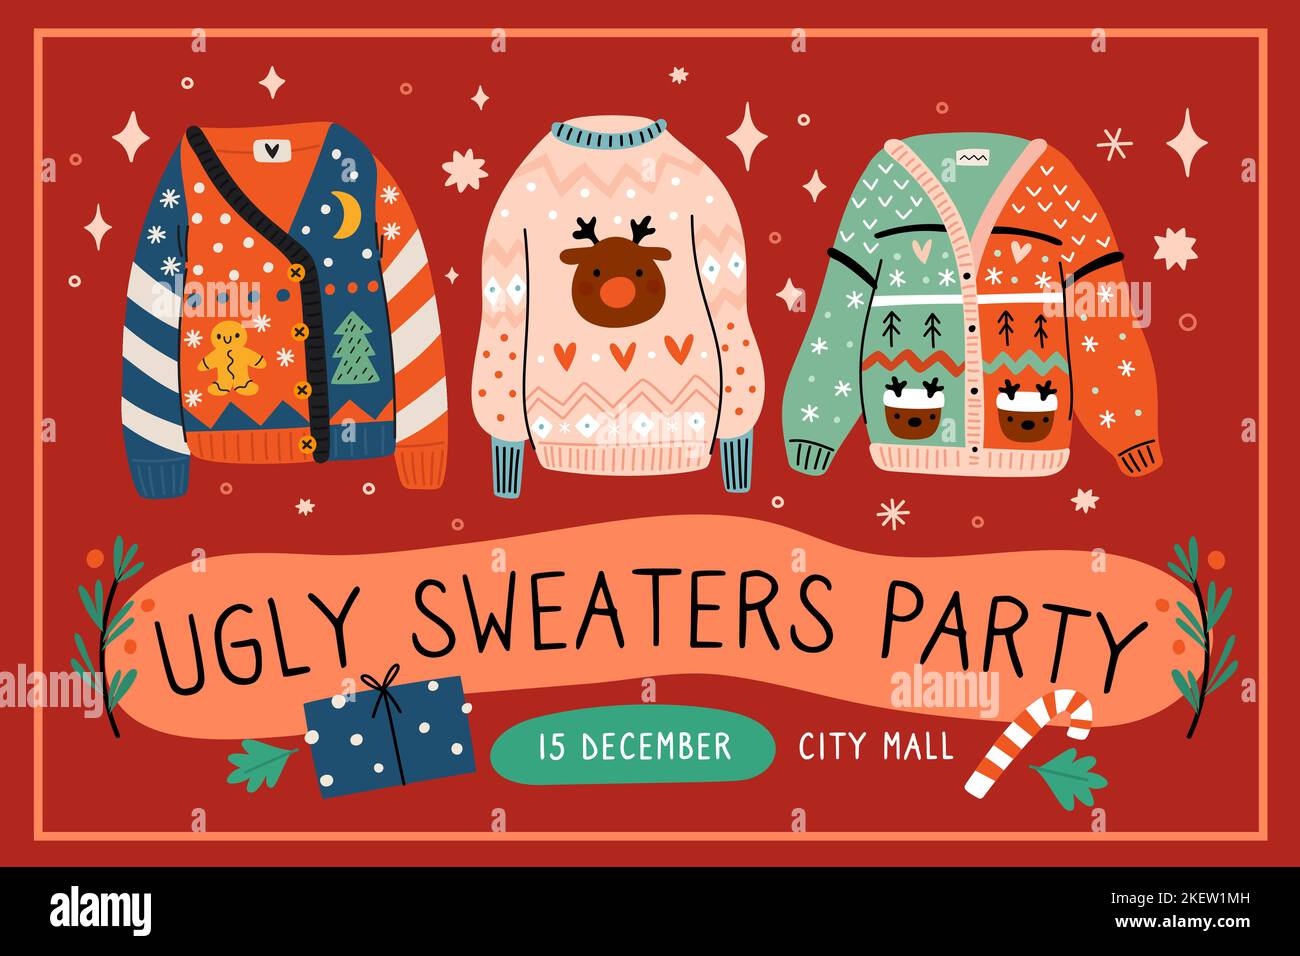 Ugly sweaters party. Handmade Christmas knitted cozy clothes. Traditional holiday pullovers. Patterned wears. Invitation card cartoon design. Xmas Stock Vector